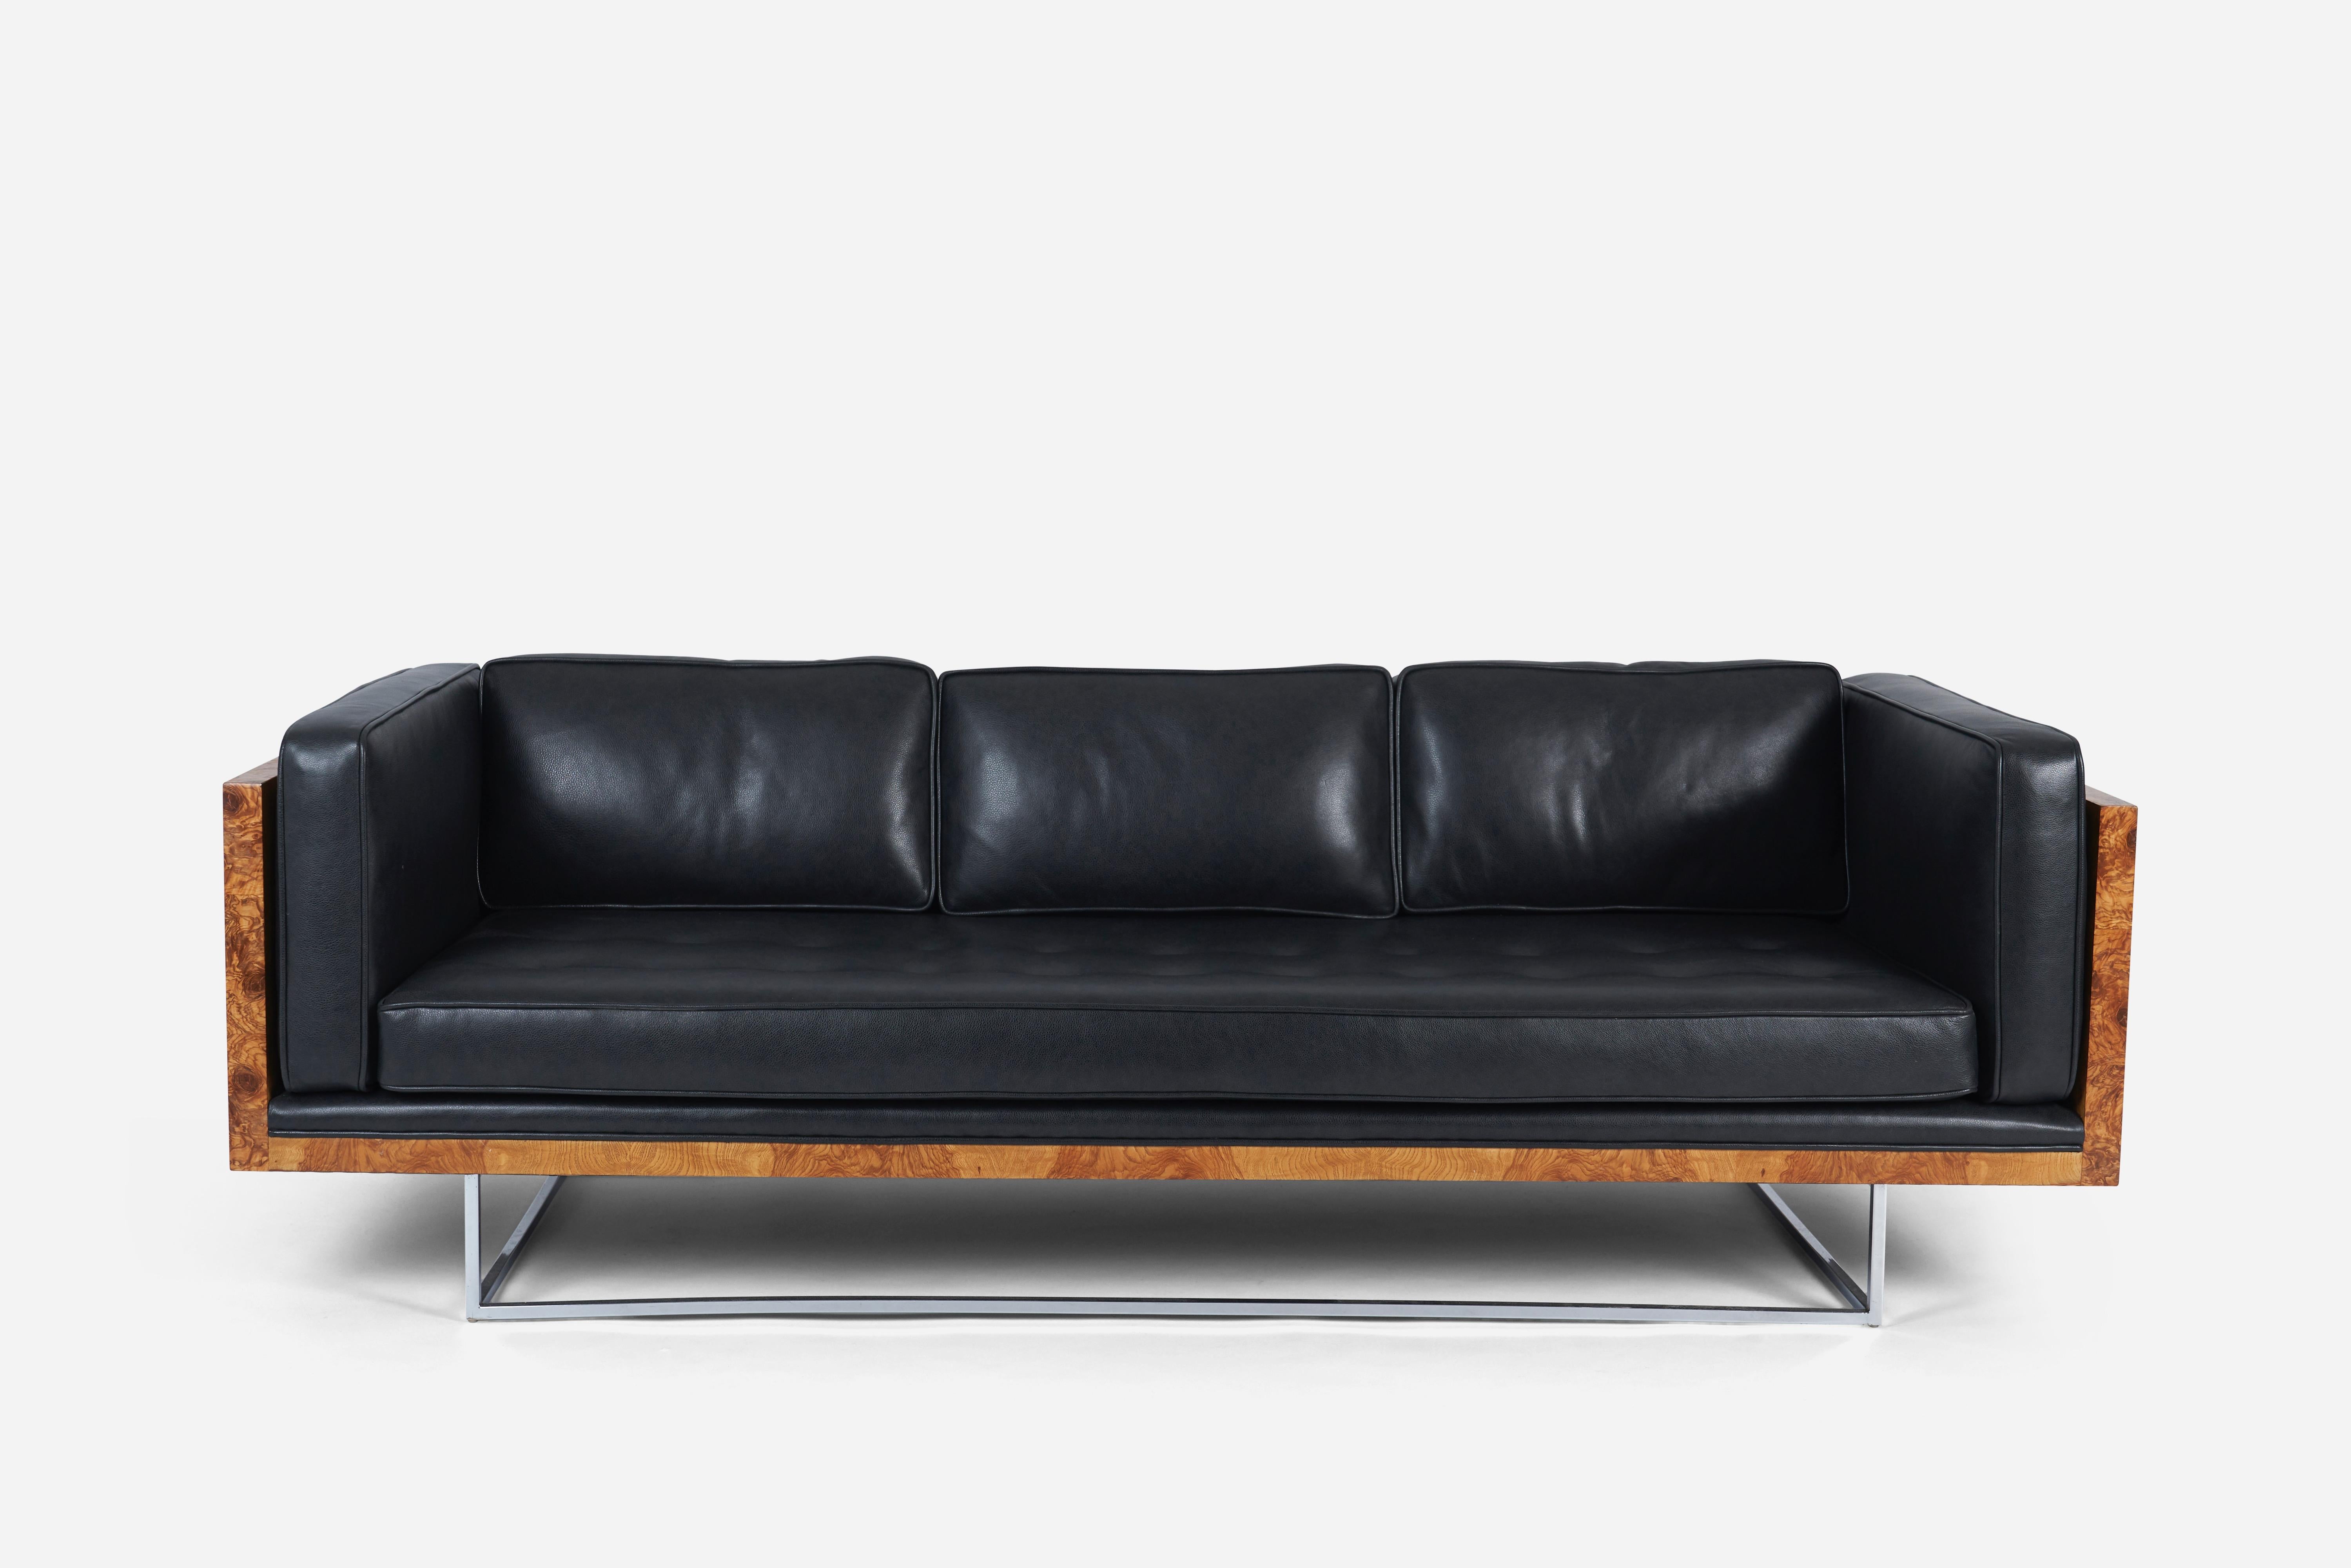 Burl wood case sofa by Milo Baughman for Thayer Coggin. Fully restored figural burl wood case with new foam, feathers, and new black leather upholstery.